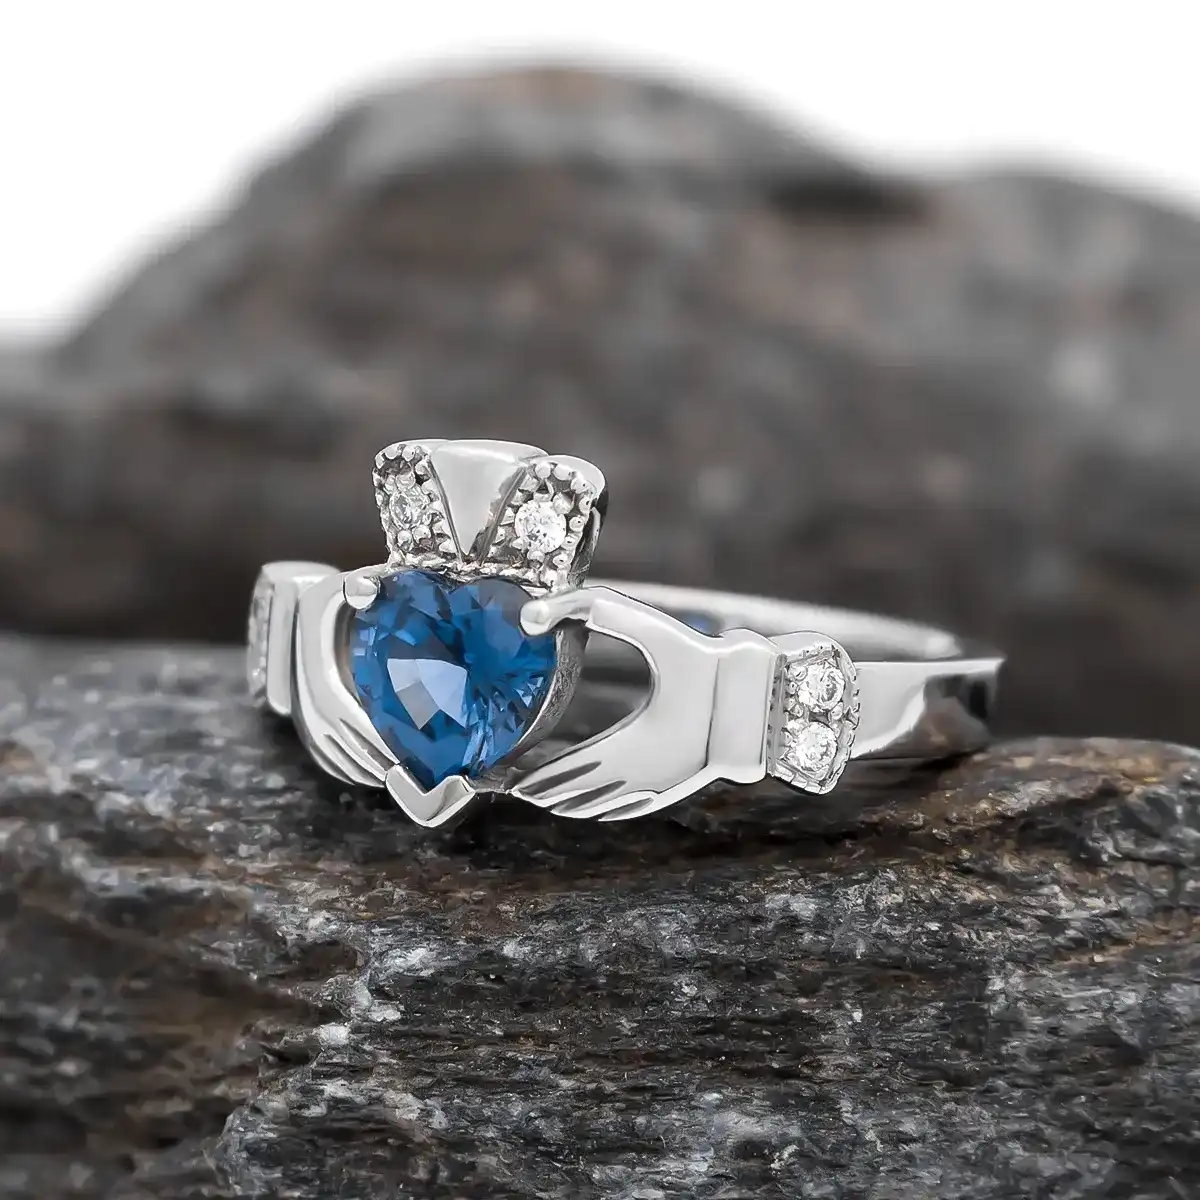 White Gold Claddagh Ring with Sapphire and Diamond